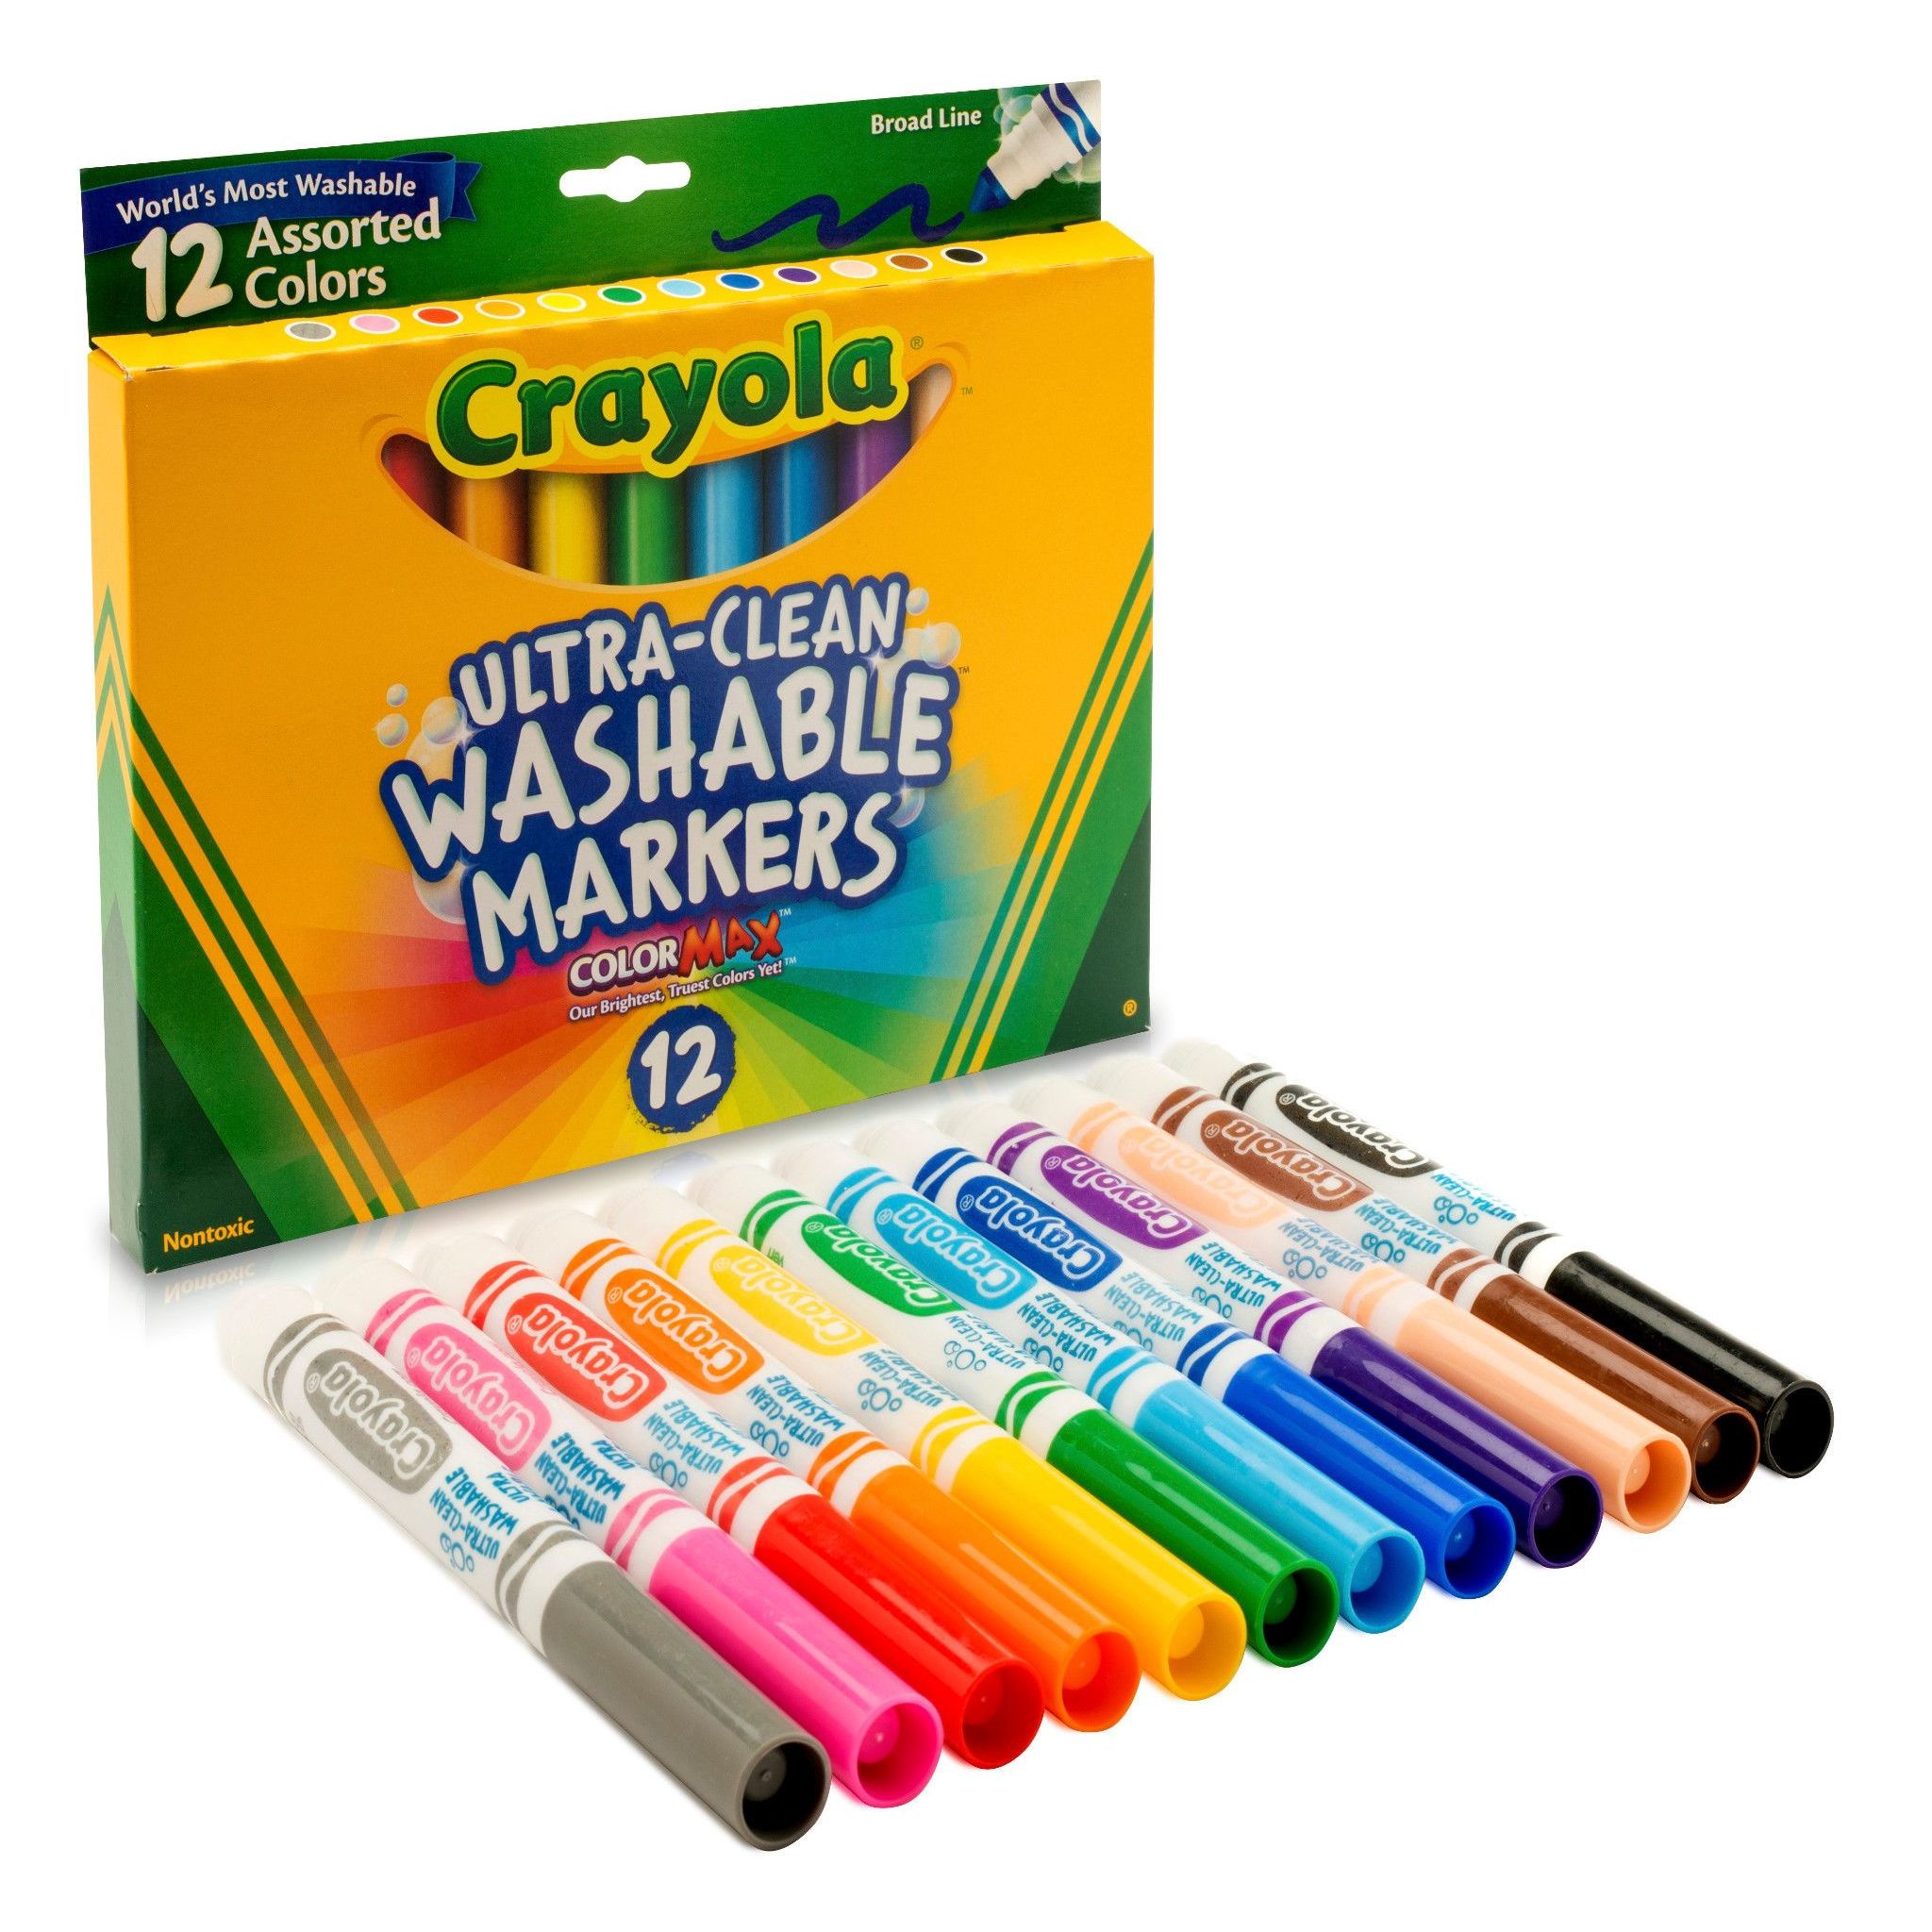 Crayola Classic Ultra-Clean Washable Markers 12 ct Color Max - image 1 of 3